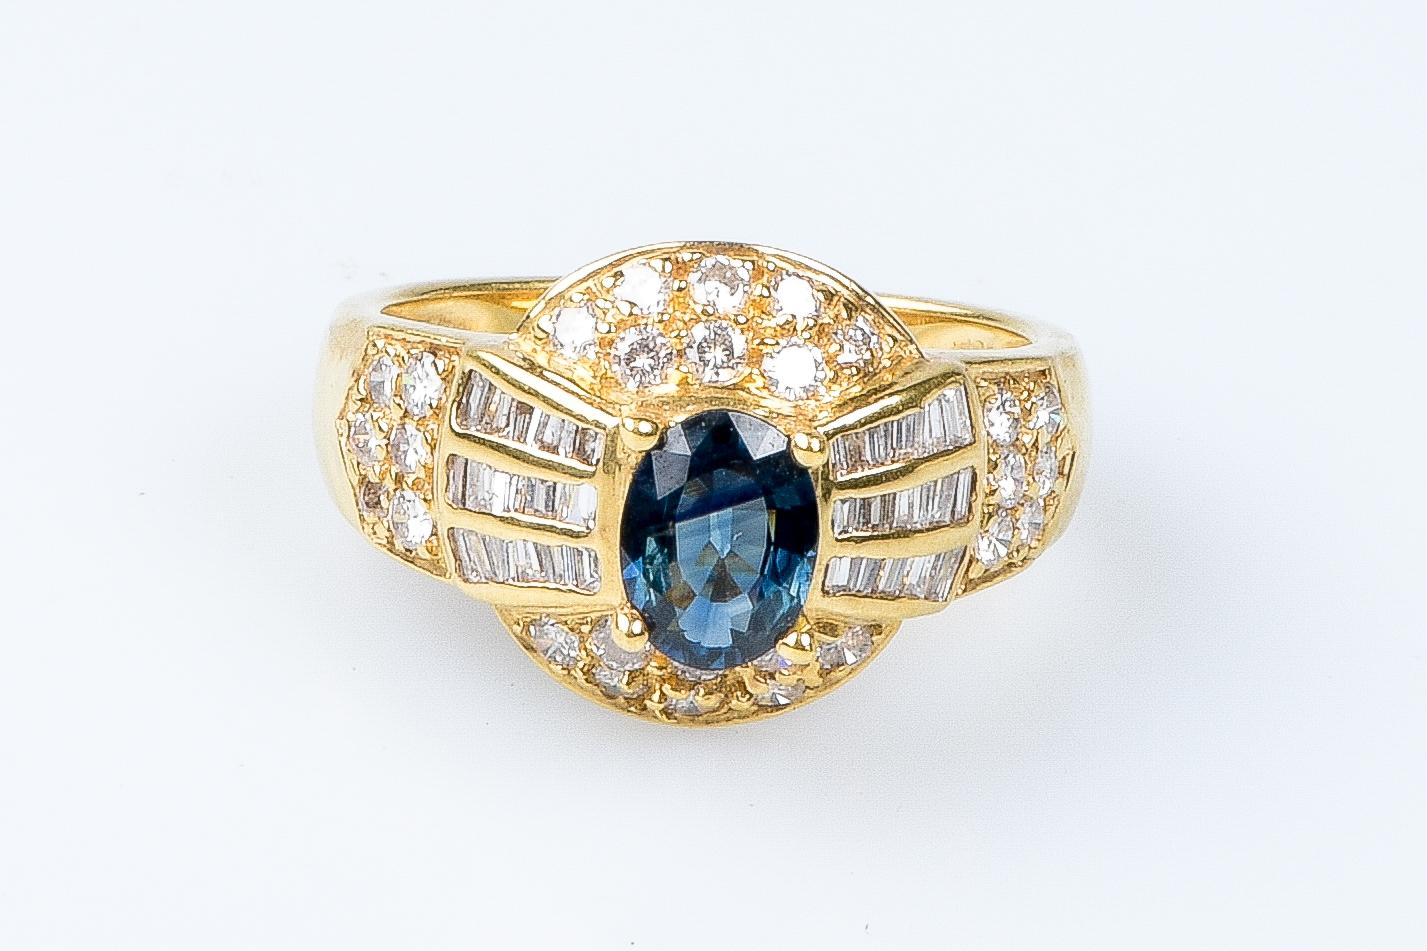 18 carat yellow gold ring designed with 1 oval sapphire weighing 1.06 carats, 30 baguette cut diamonds weighing 0.60 carats and 28 round brillant cut diamonds weighing 0.40 carats.

Quality of the diamond
Color : G
Clarity : VS

Weight : 5.78